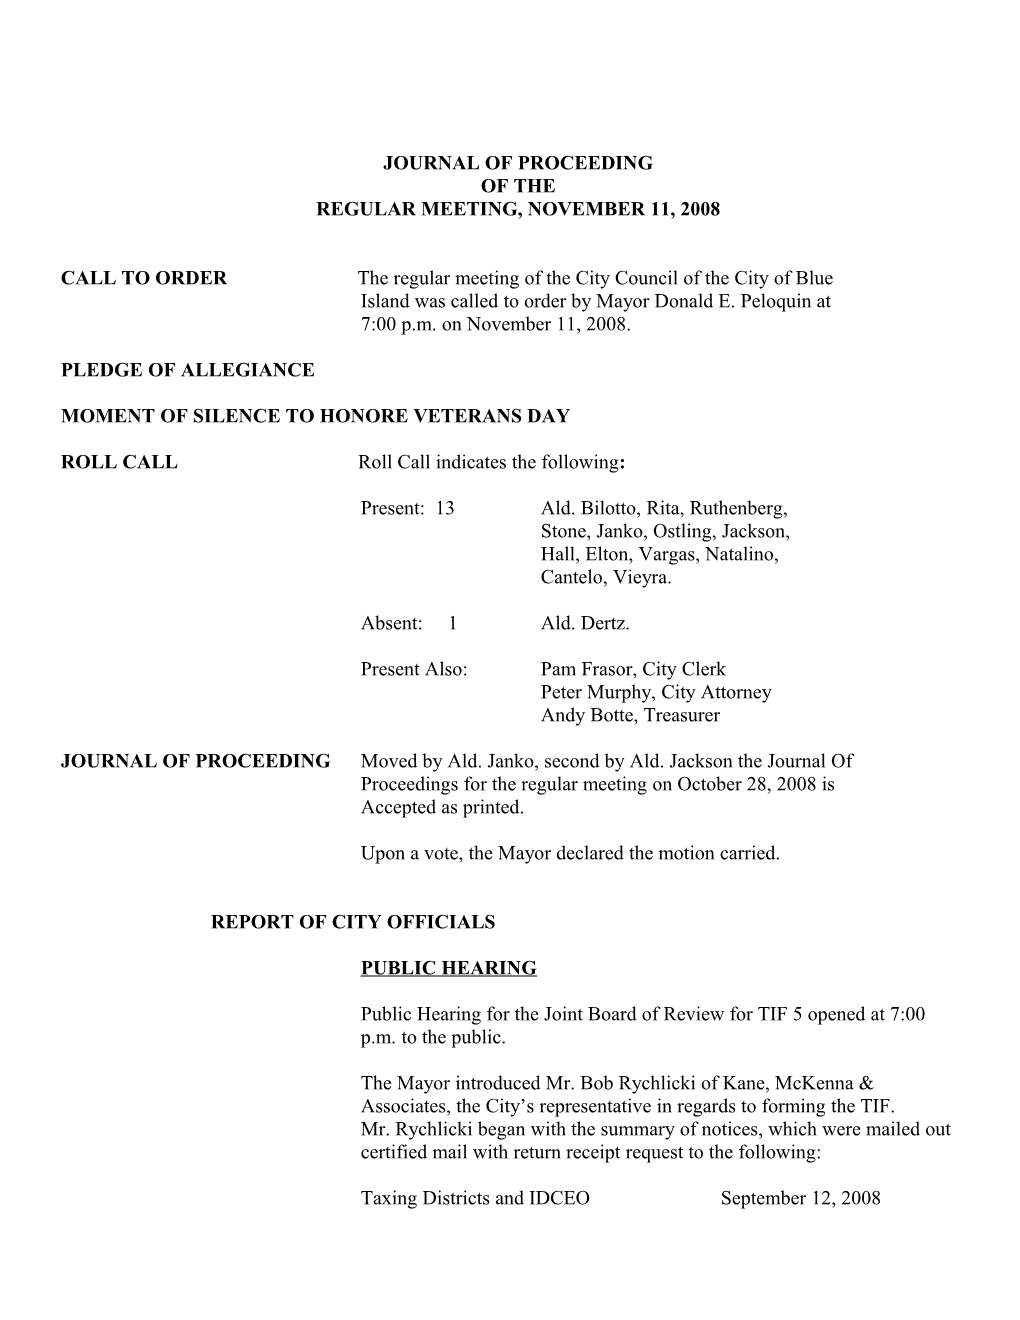 CALL to ORDER the Regular Meeting of the City Council of the City of Blue